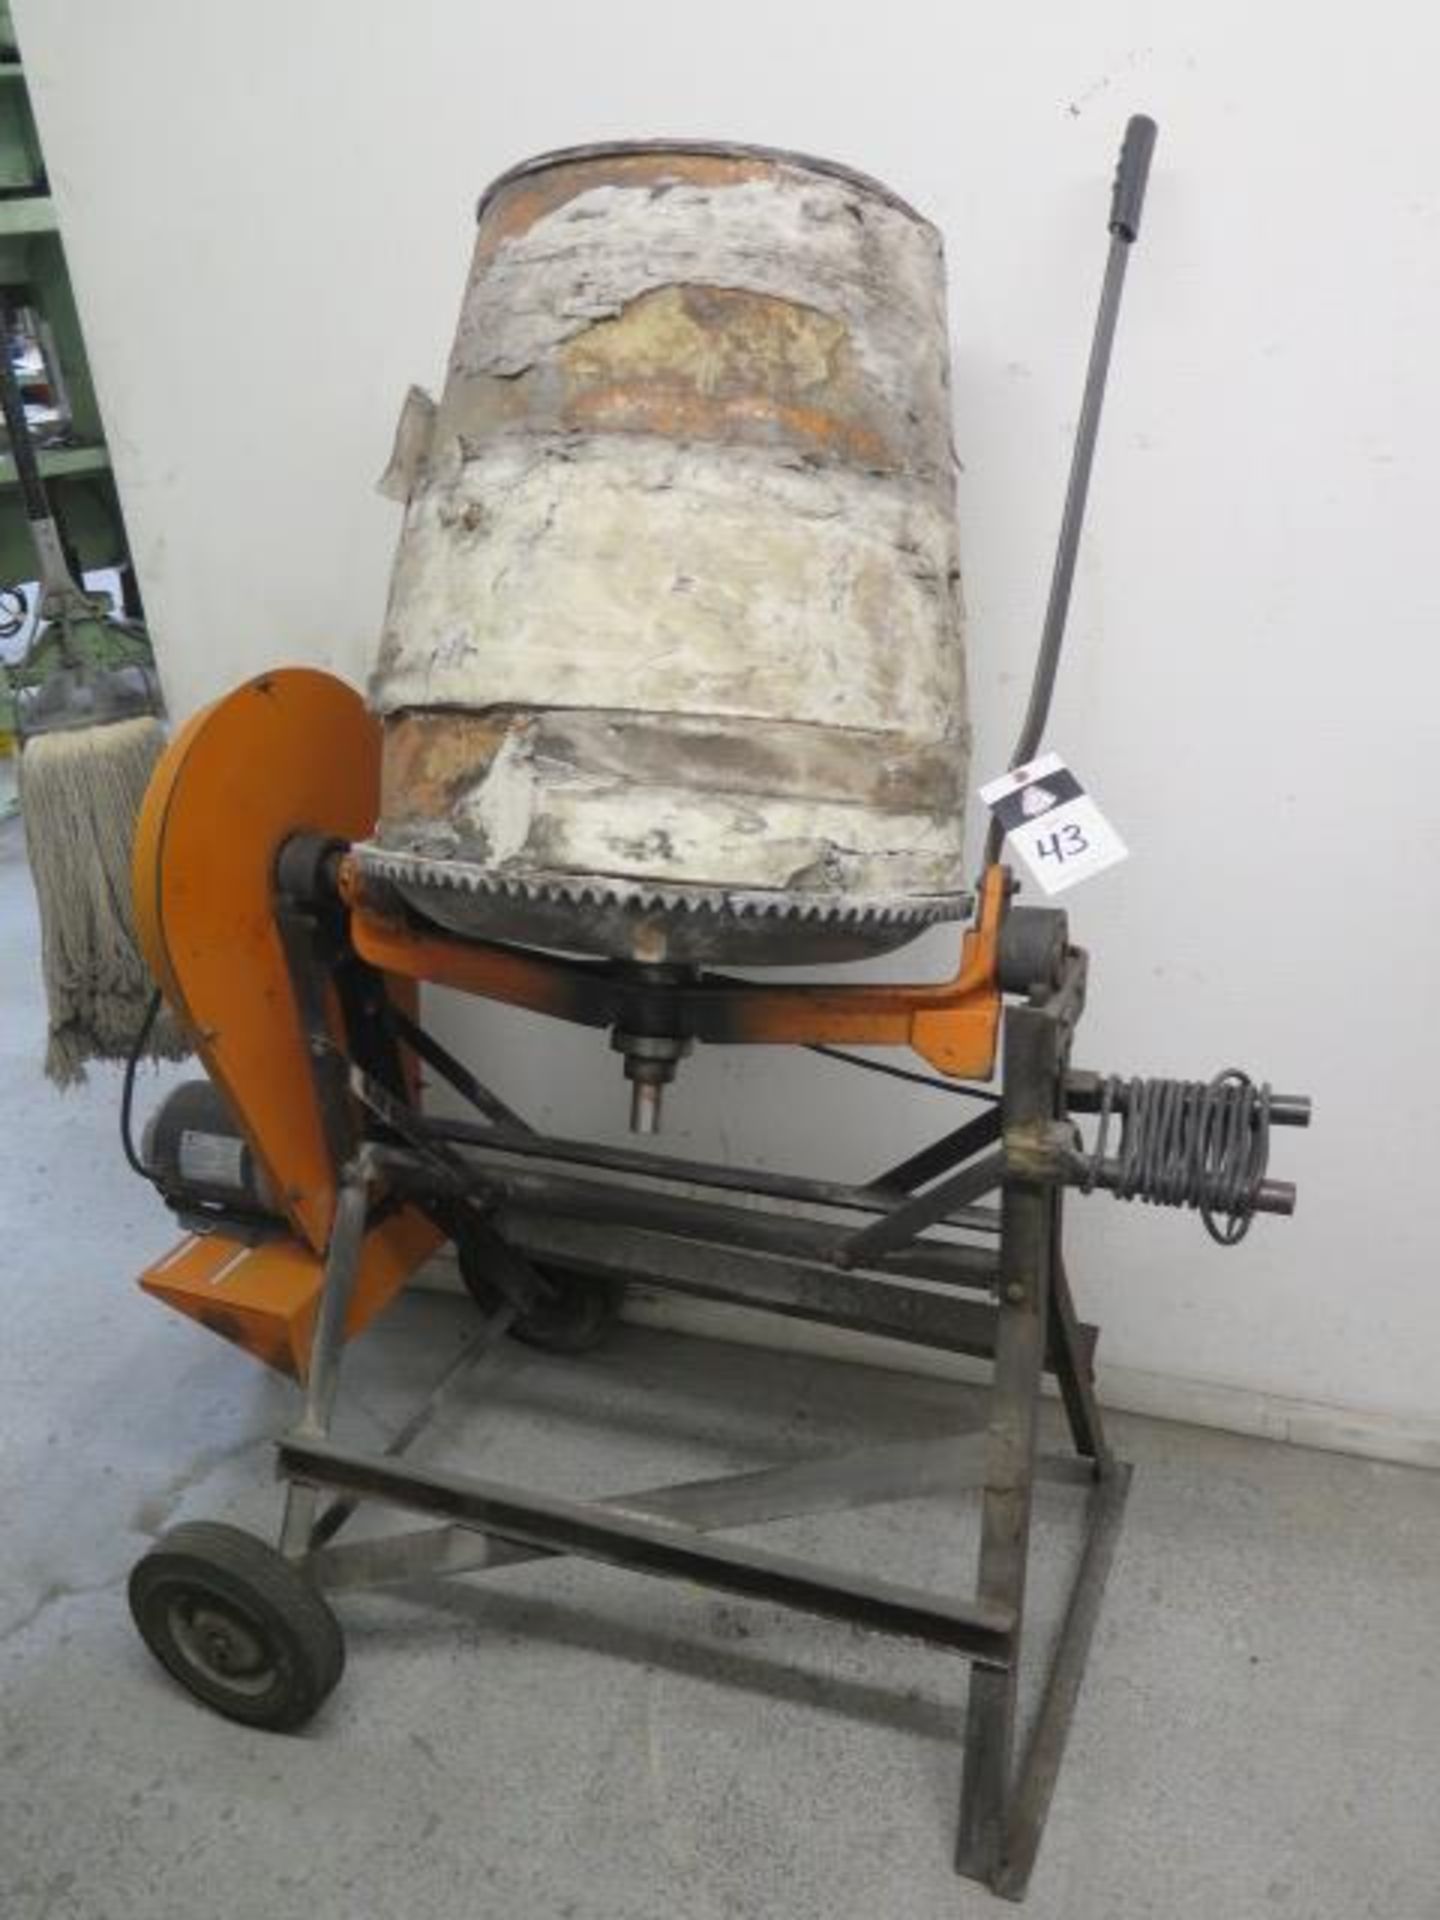 Cement Mixer / Media Tumbler (SOLD AS-IS - NO WARRANTY)